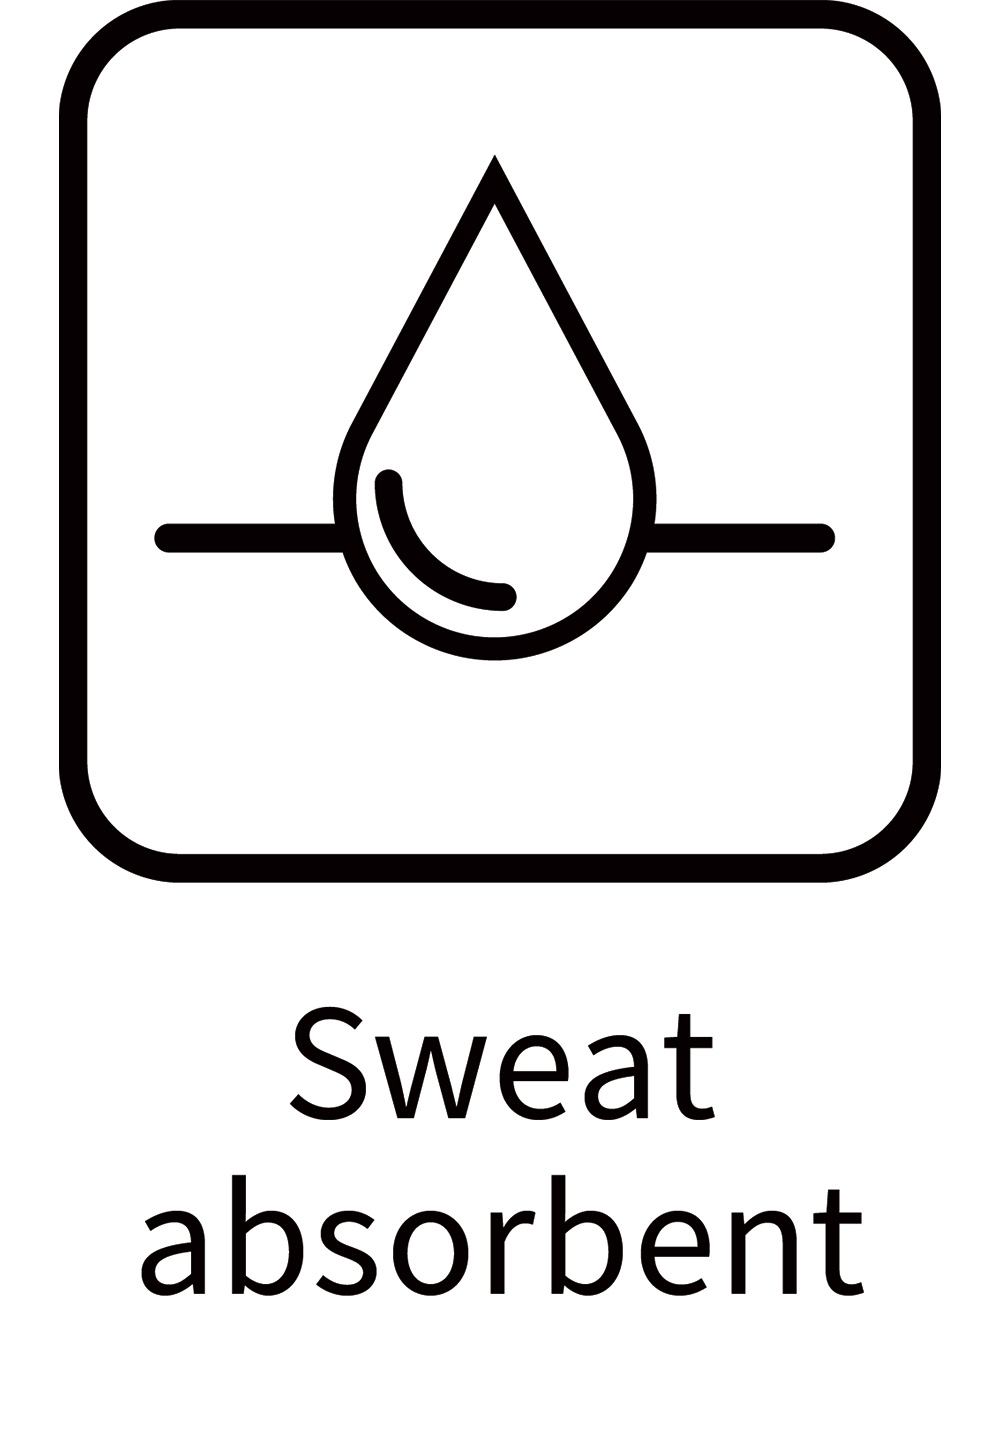 Sweat absorbent